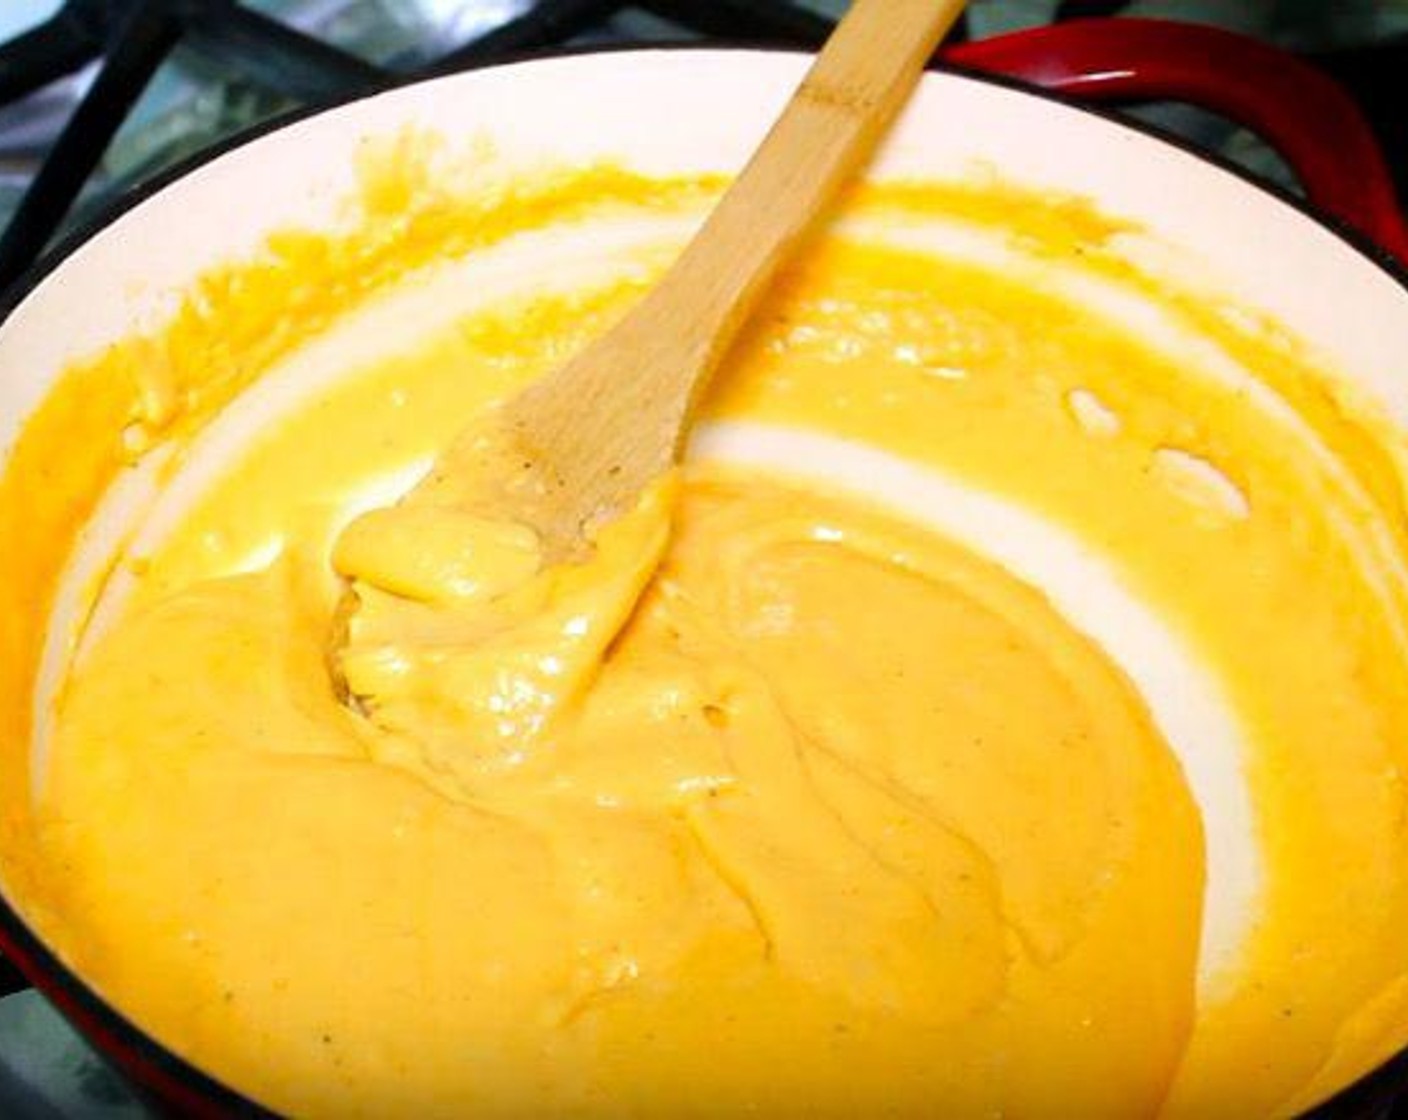 step 3 Add Sharp Cheddar Cheese (2 cups) and Mozzarella Cheese (1 cup), reserving a bit for topping. Turn the heat off and allow the cheese to melt, whisking throughout.